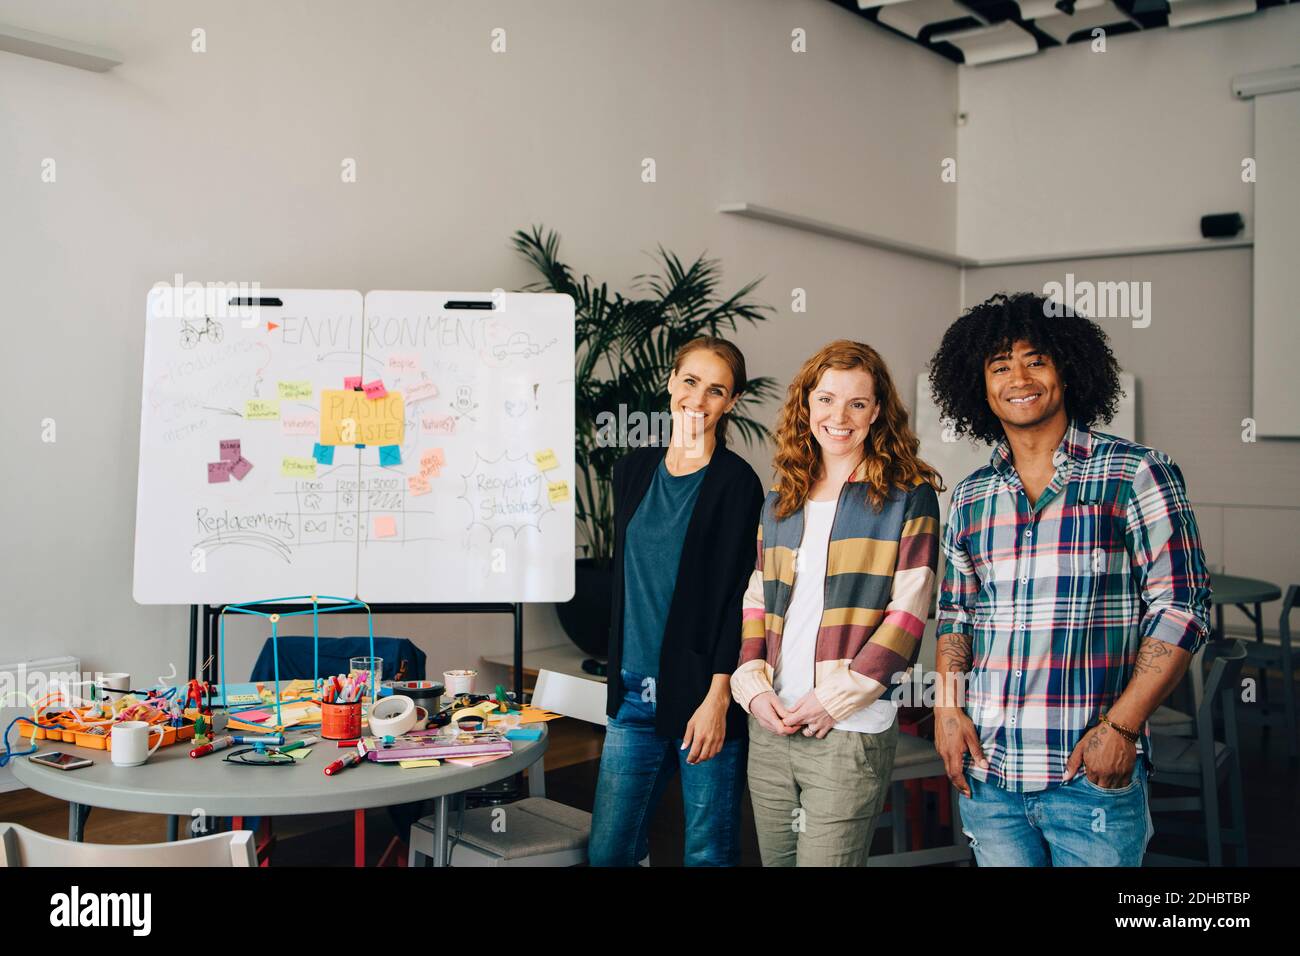 Portrait of smiling technician team standing by table and whiteboard at creative office Stock Photo